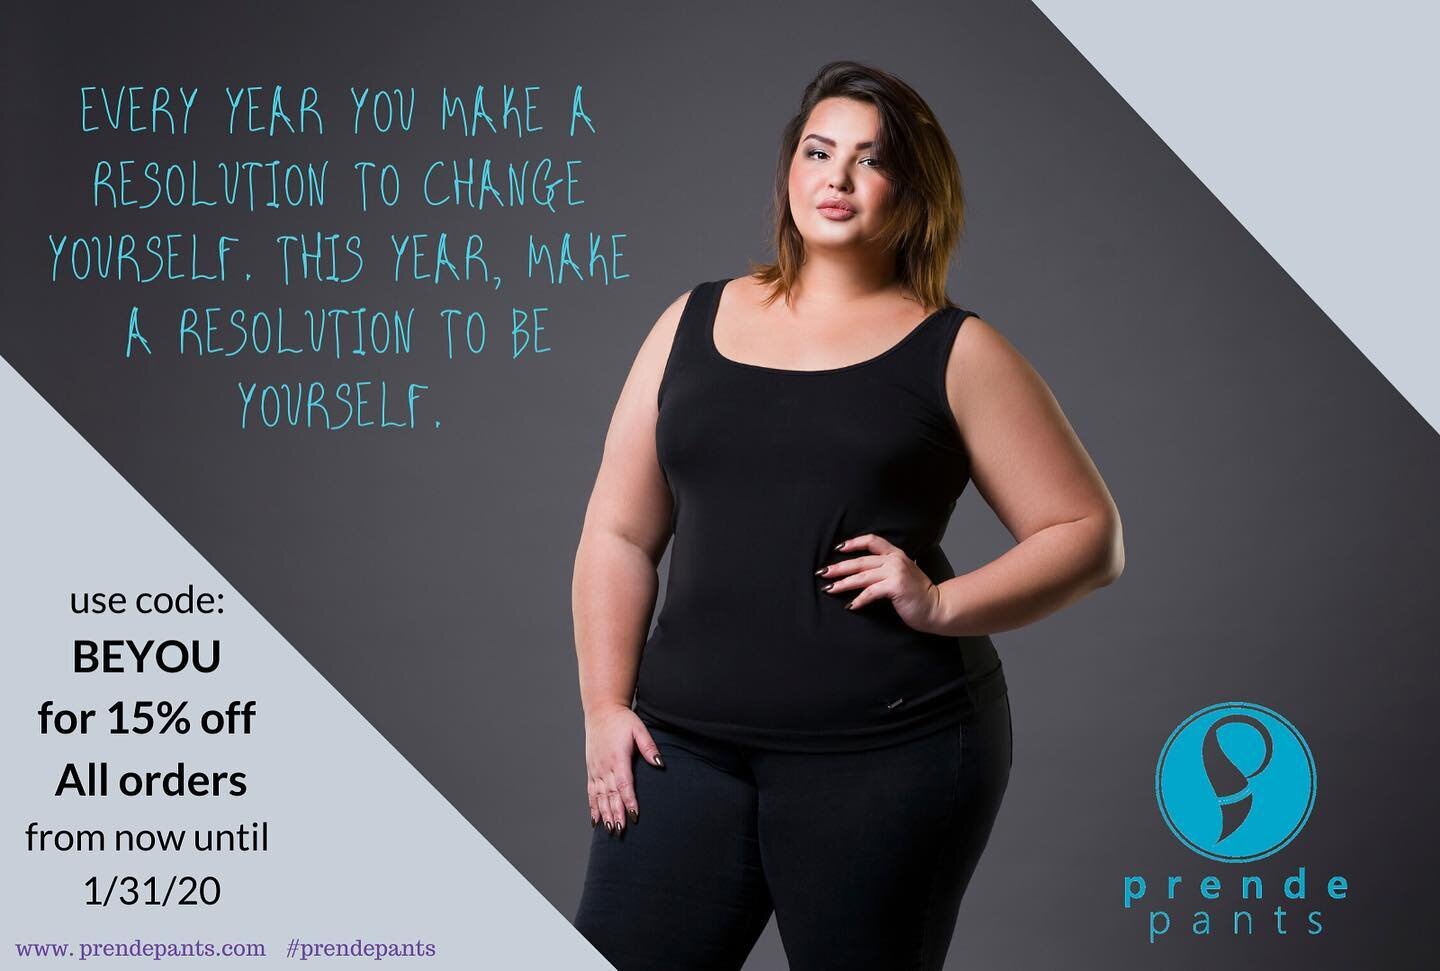 Every year you make a resolution to change yourself. This year, make a resolution to BE yourself. Save 15% in January with code &ldquo;BEYOU&rdquo; #prendepants #postpregnancyleggings